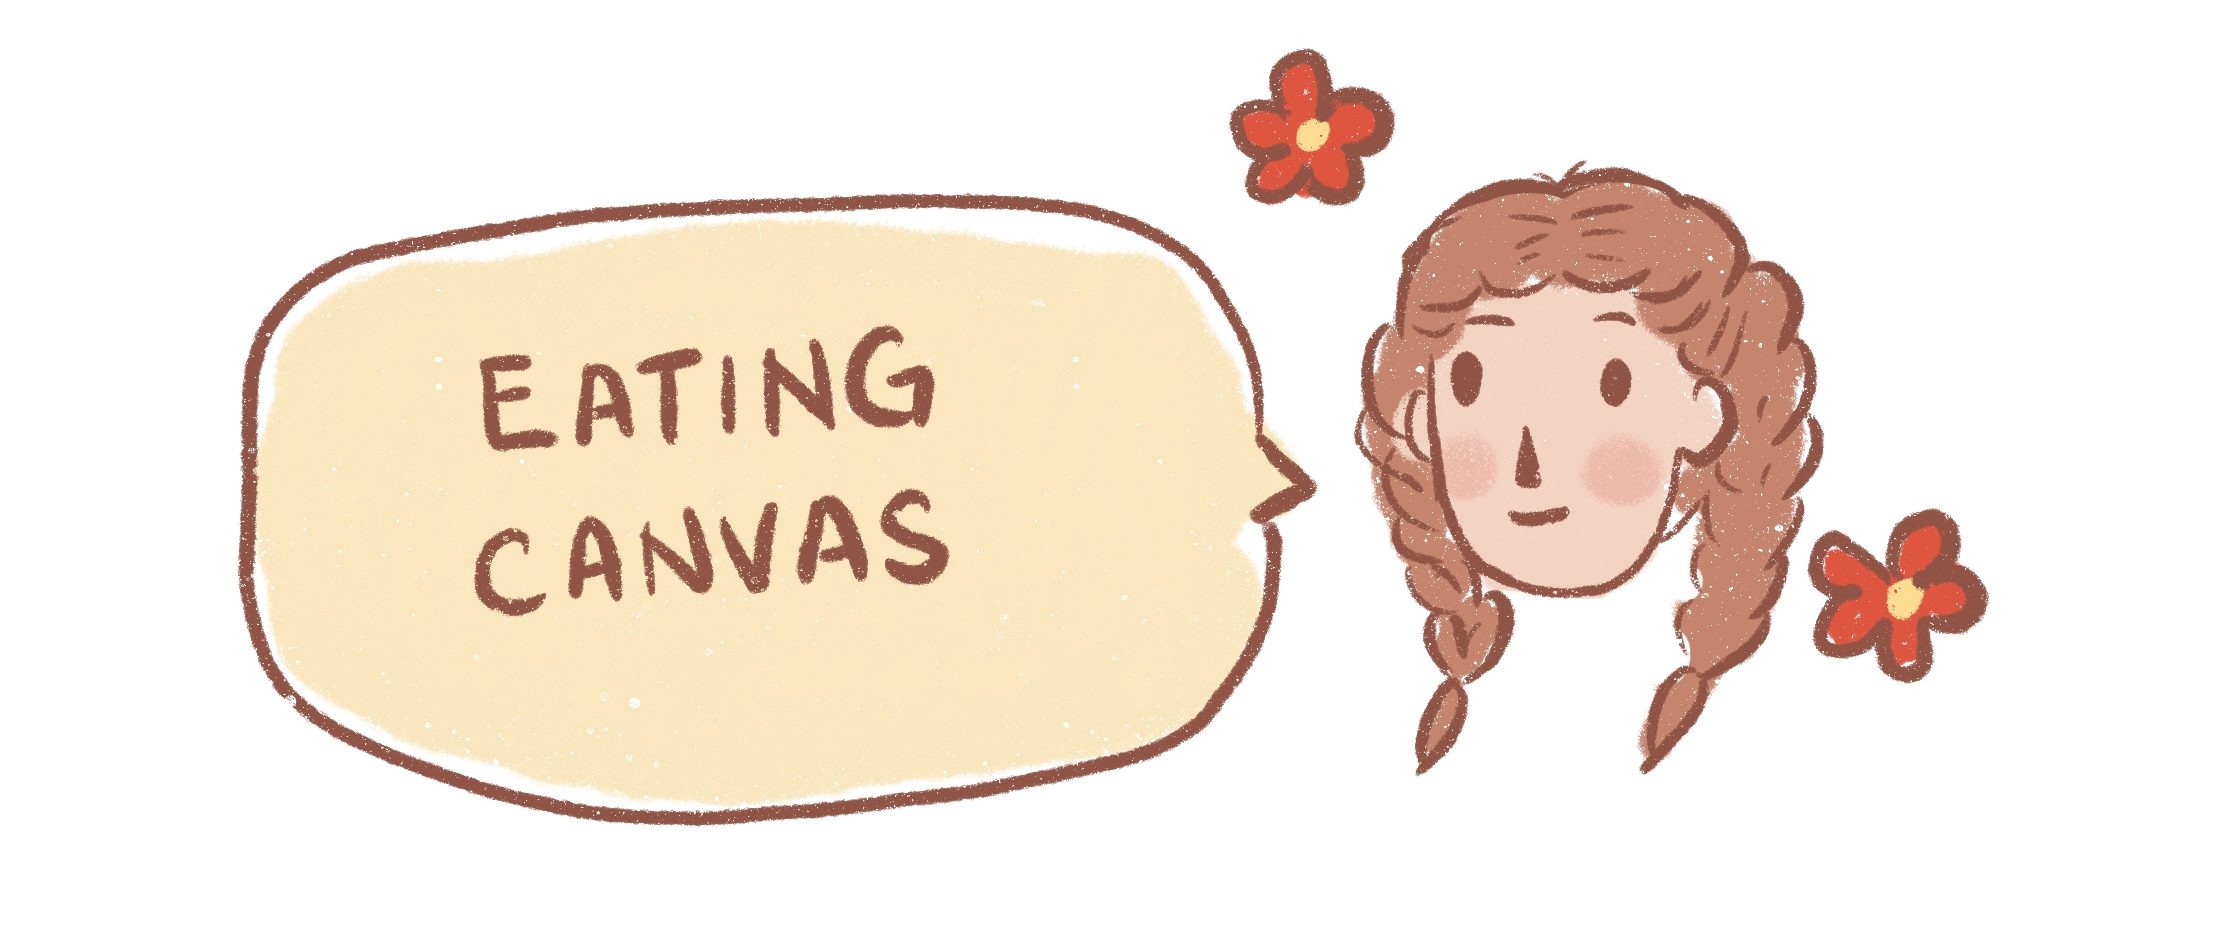 EATING CANVAS